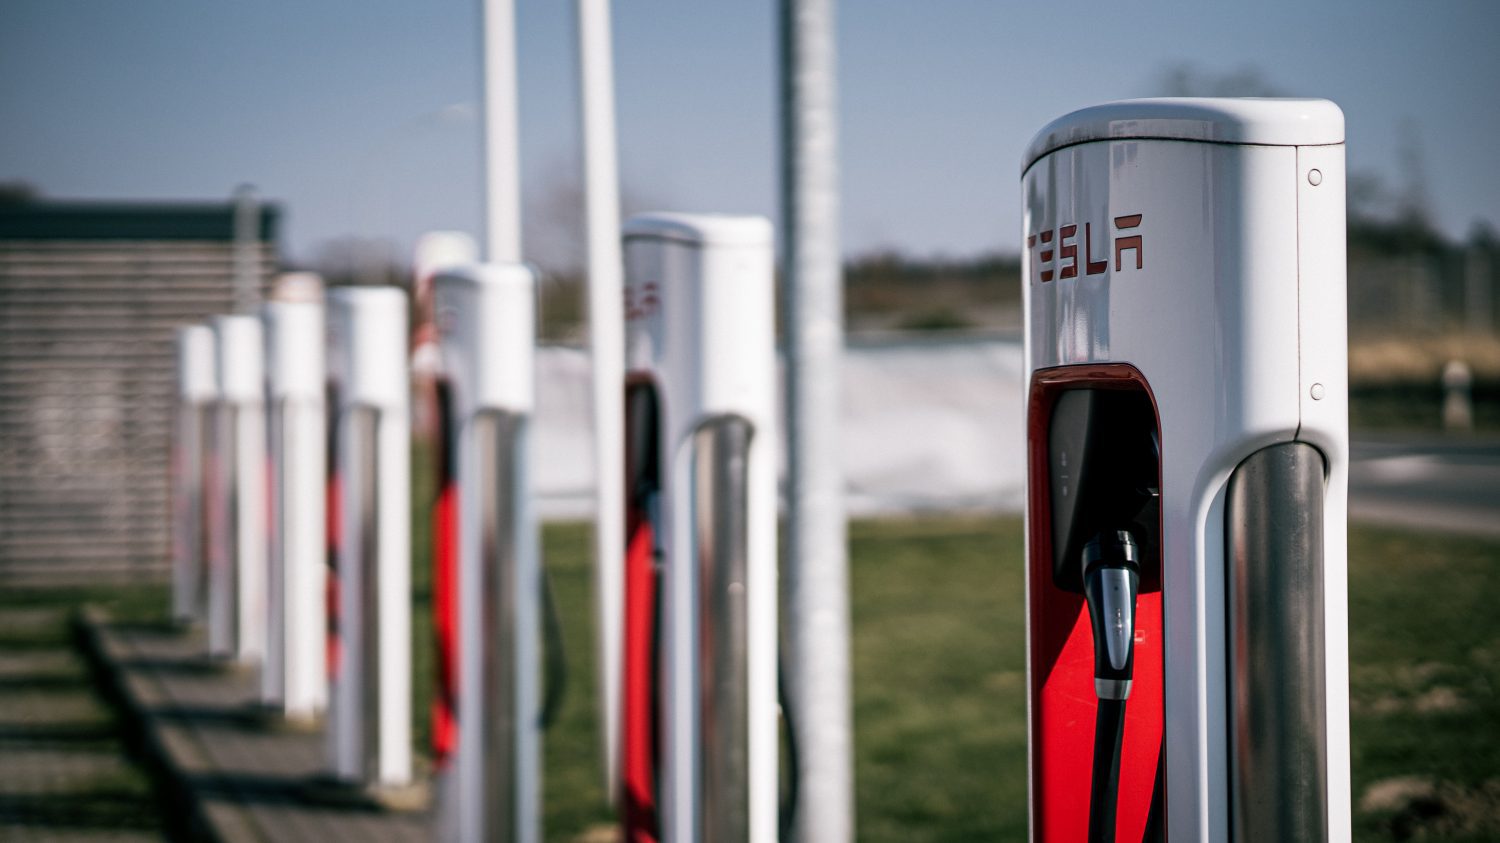 Tesla made a deal to sell its Supercharger under the EG Group, a central gas station, marking the second agreement of its kind.